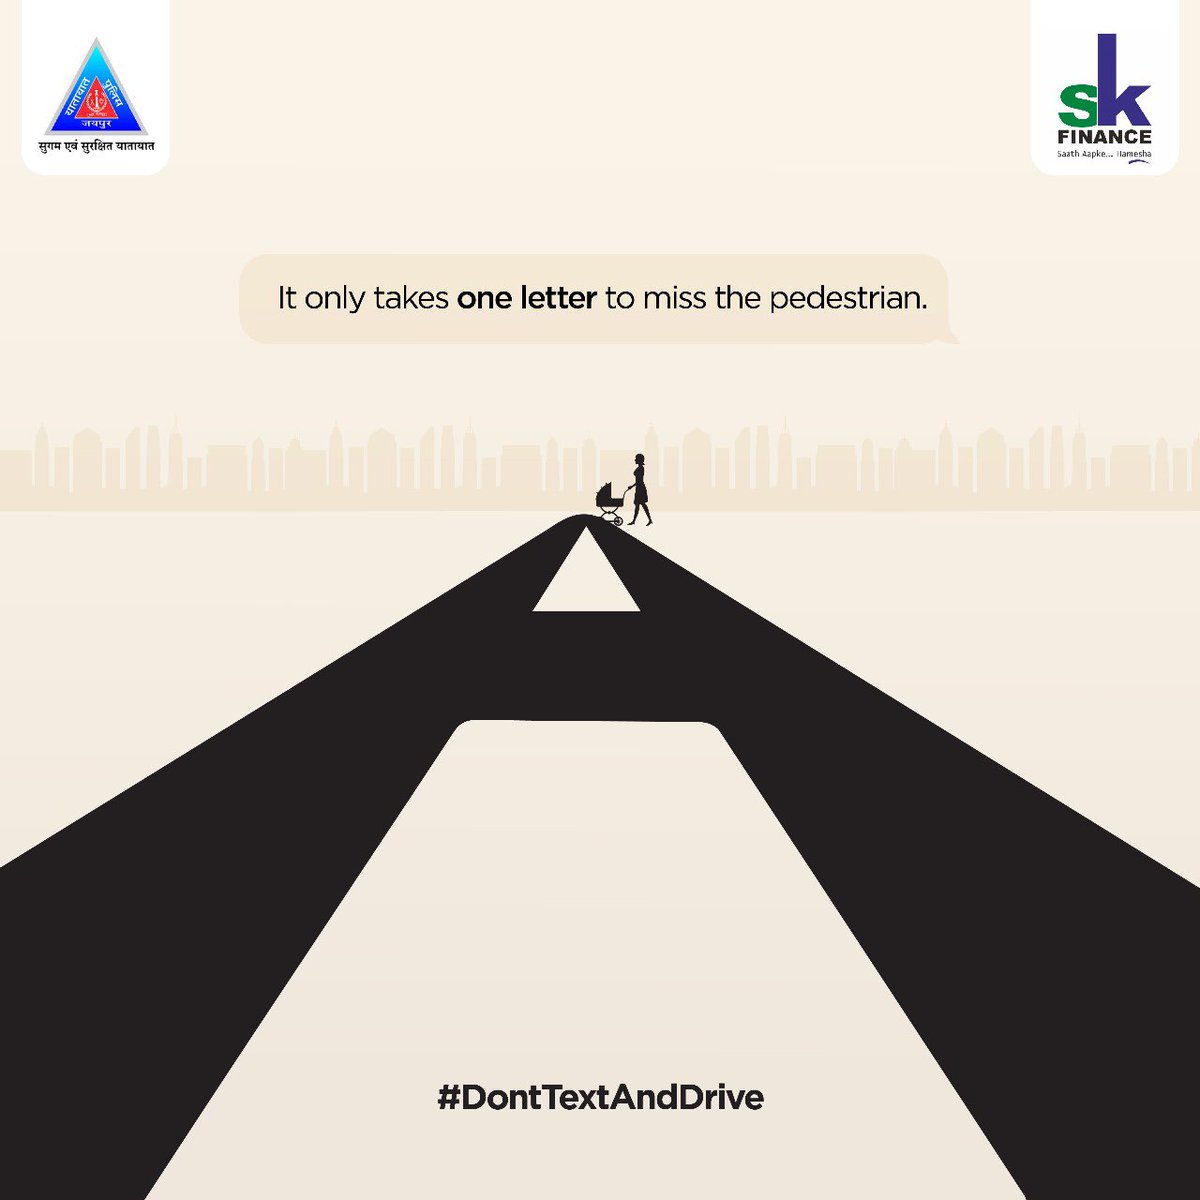 Disaster is just one letter away. 

Keep your eyes on the road while driving. 🚦📵

#StaySafe #DontTextWhileDriving #JaipurTrafficPolice #DriveSafely #SafetyFirst #FollowTrafficRules.